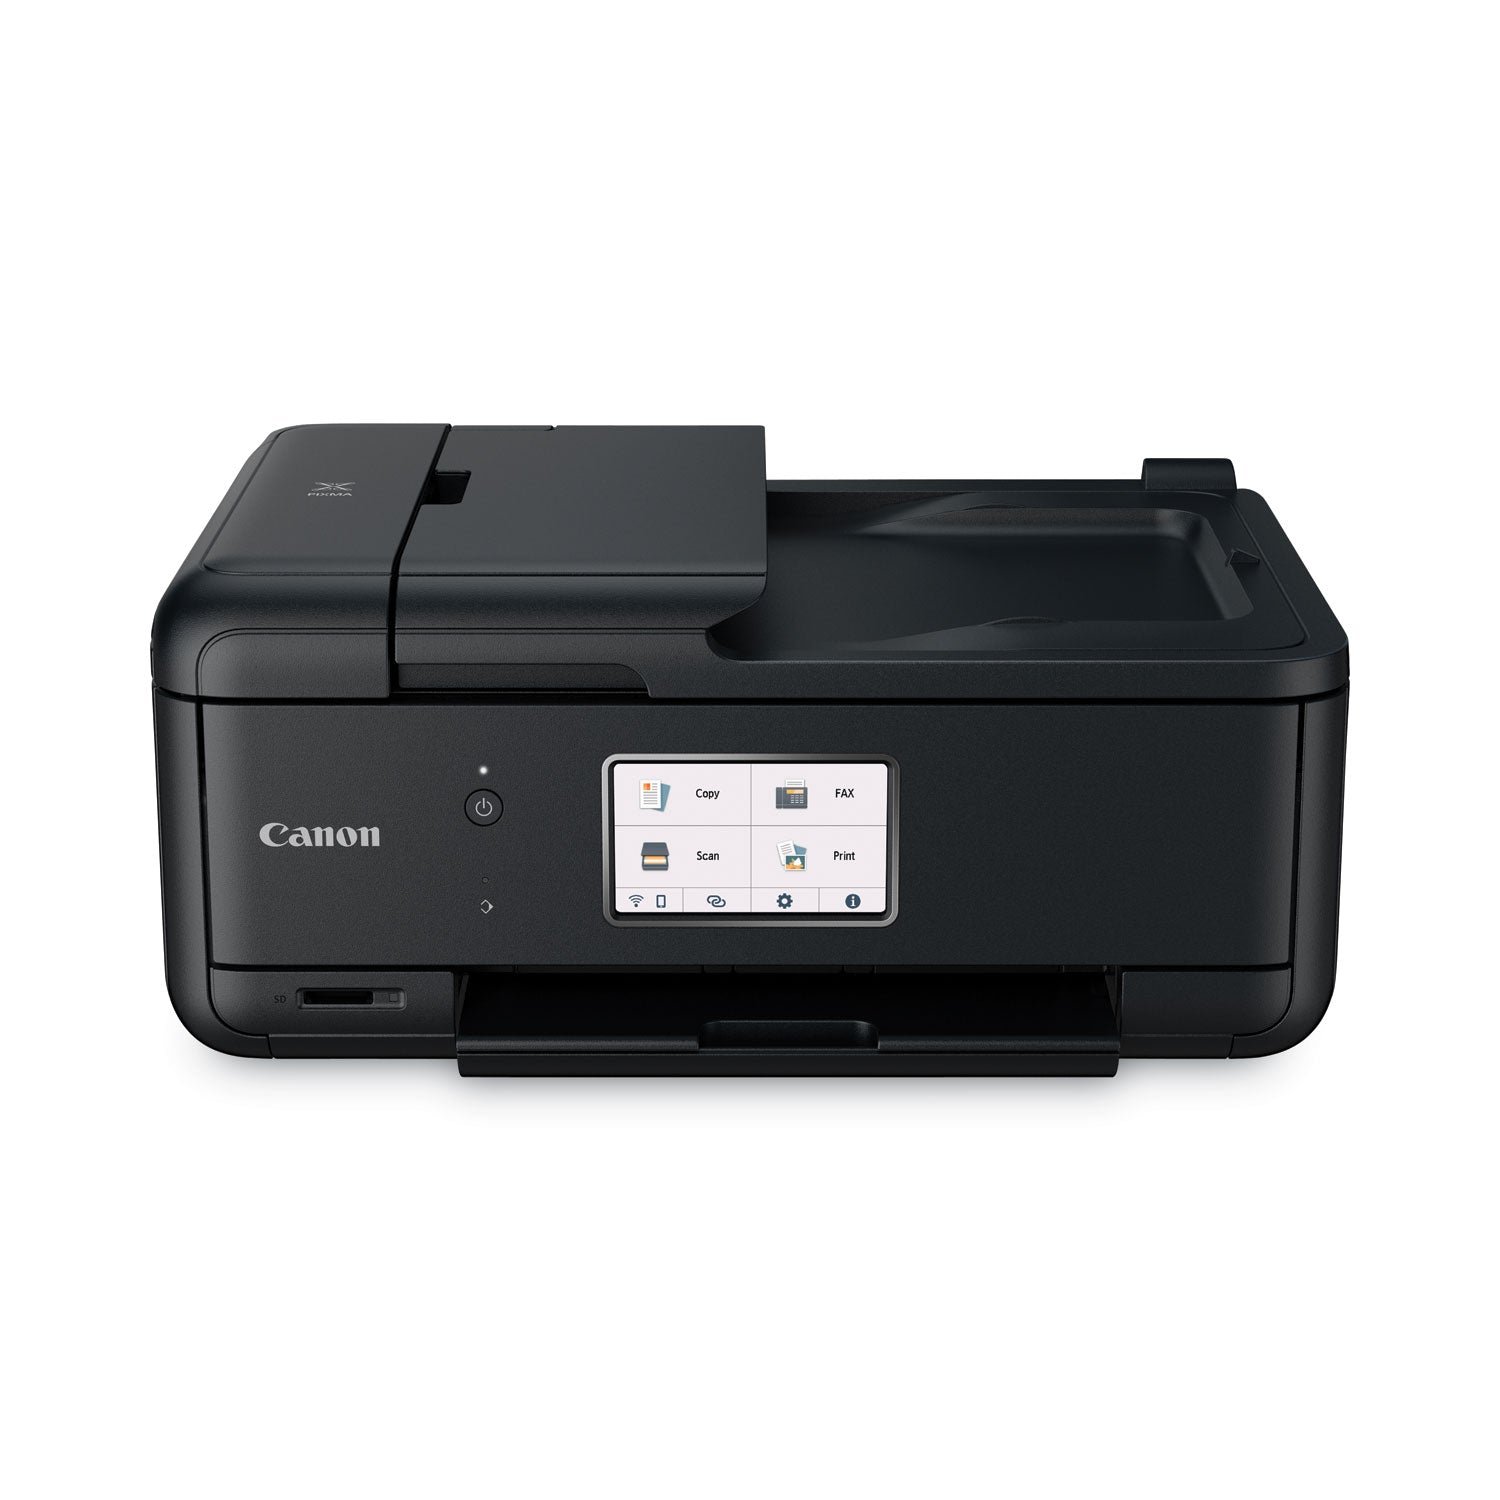 pixma-tr8620a-all-in-one-inkjet-printer-copy-fax-print-scan_cnm4451c032 - 1